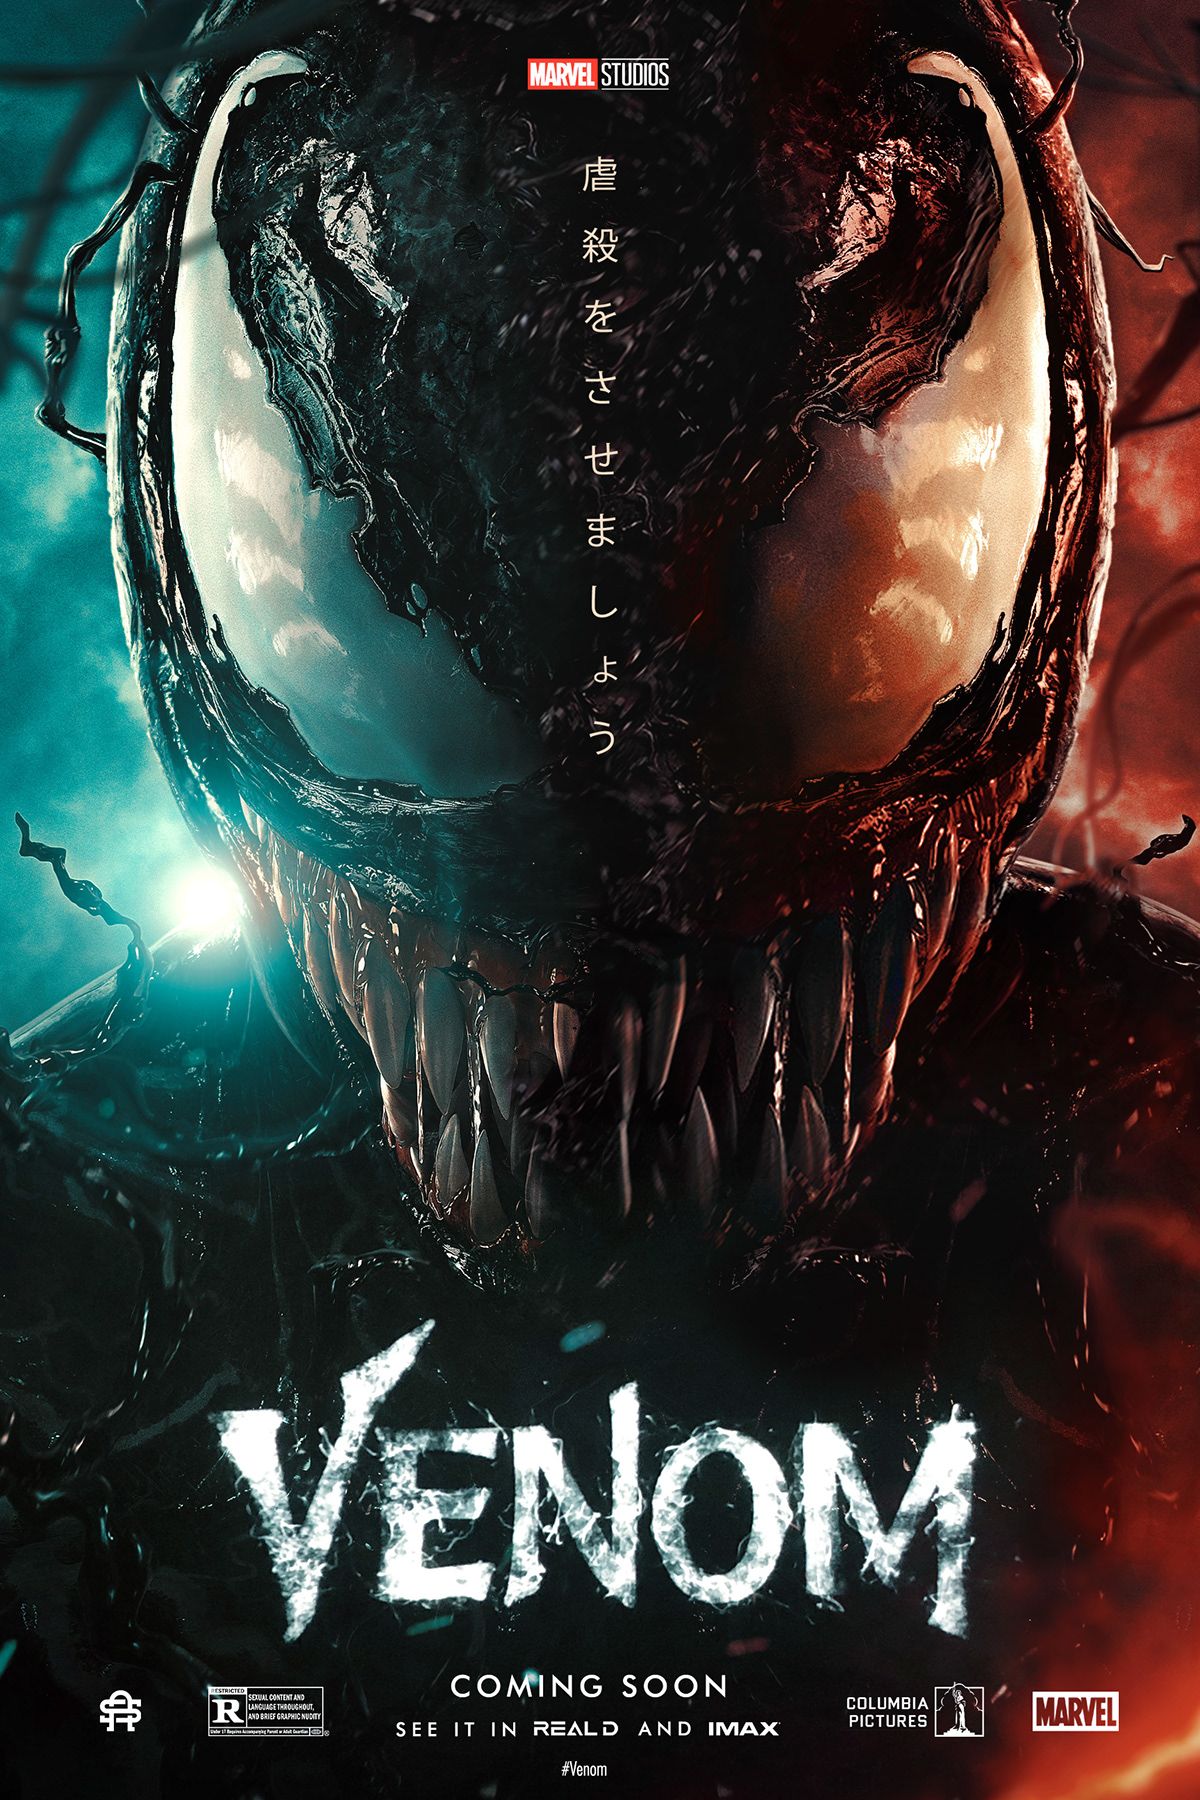 Venom®2: Let there be carnage